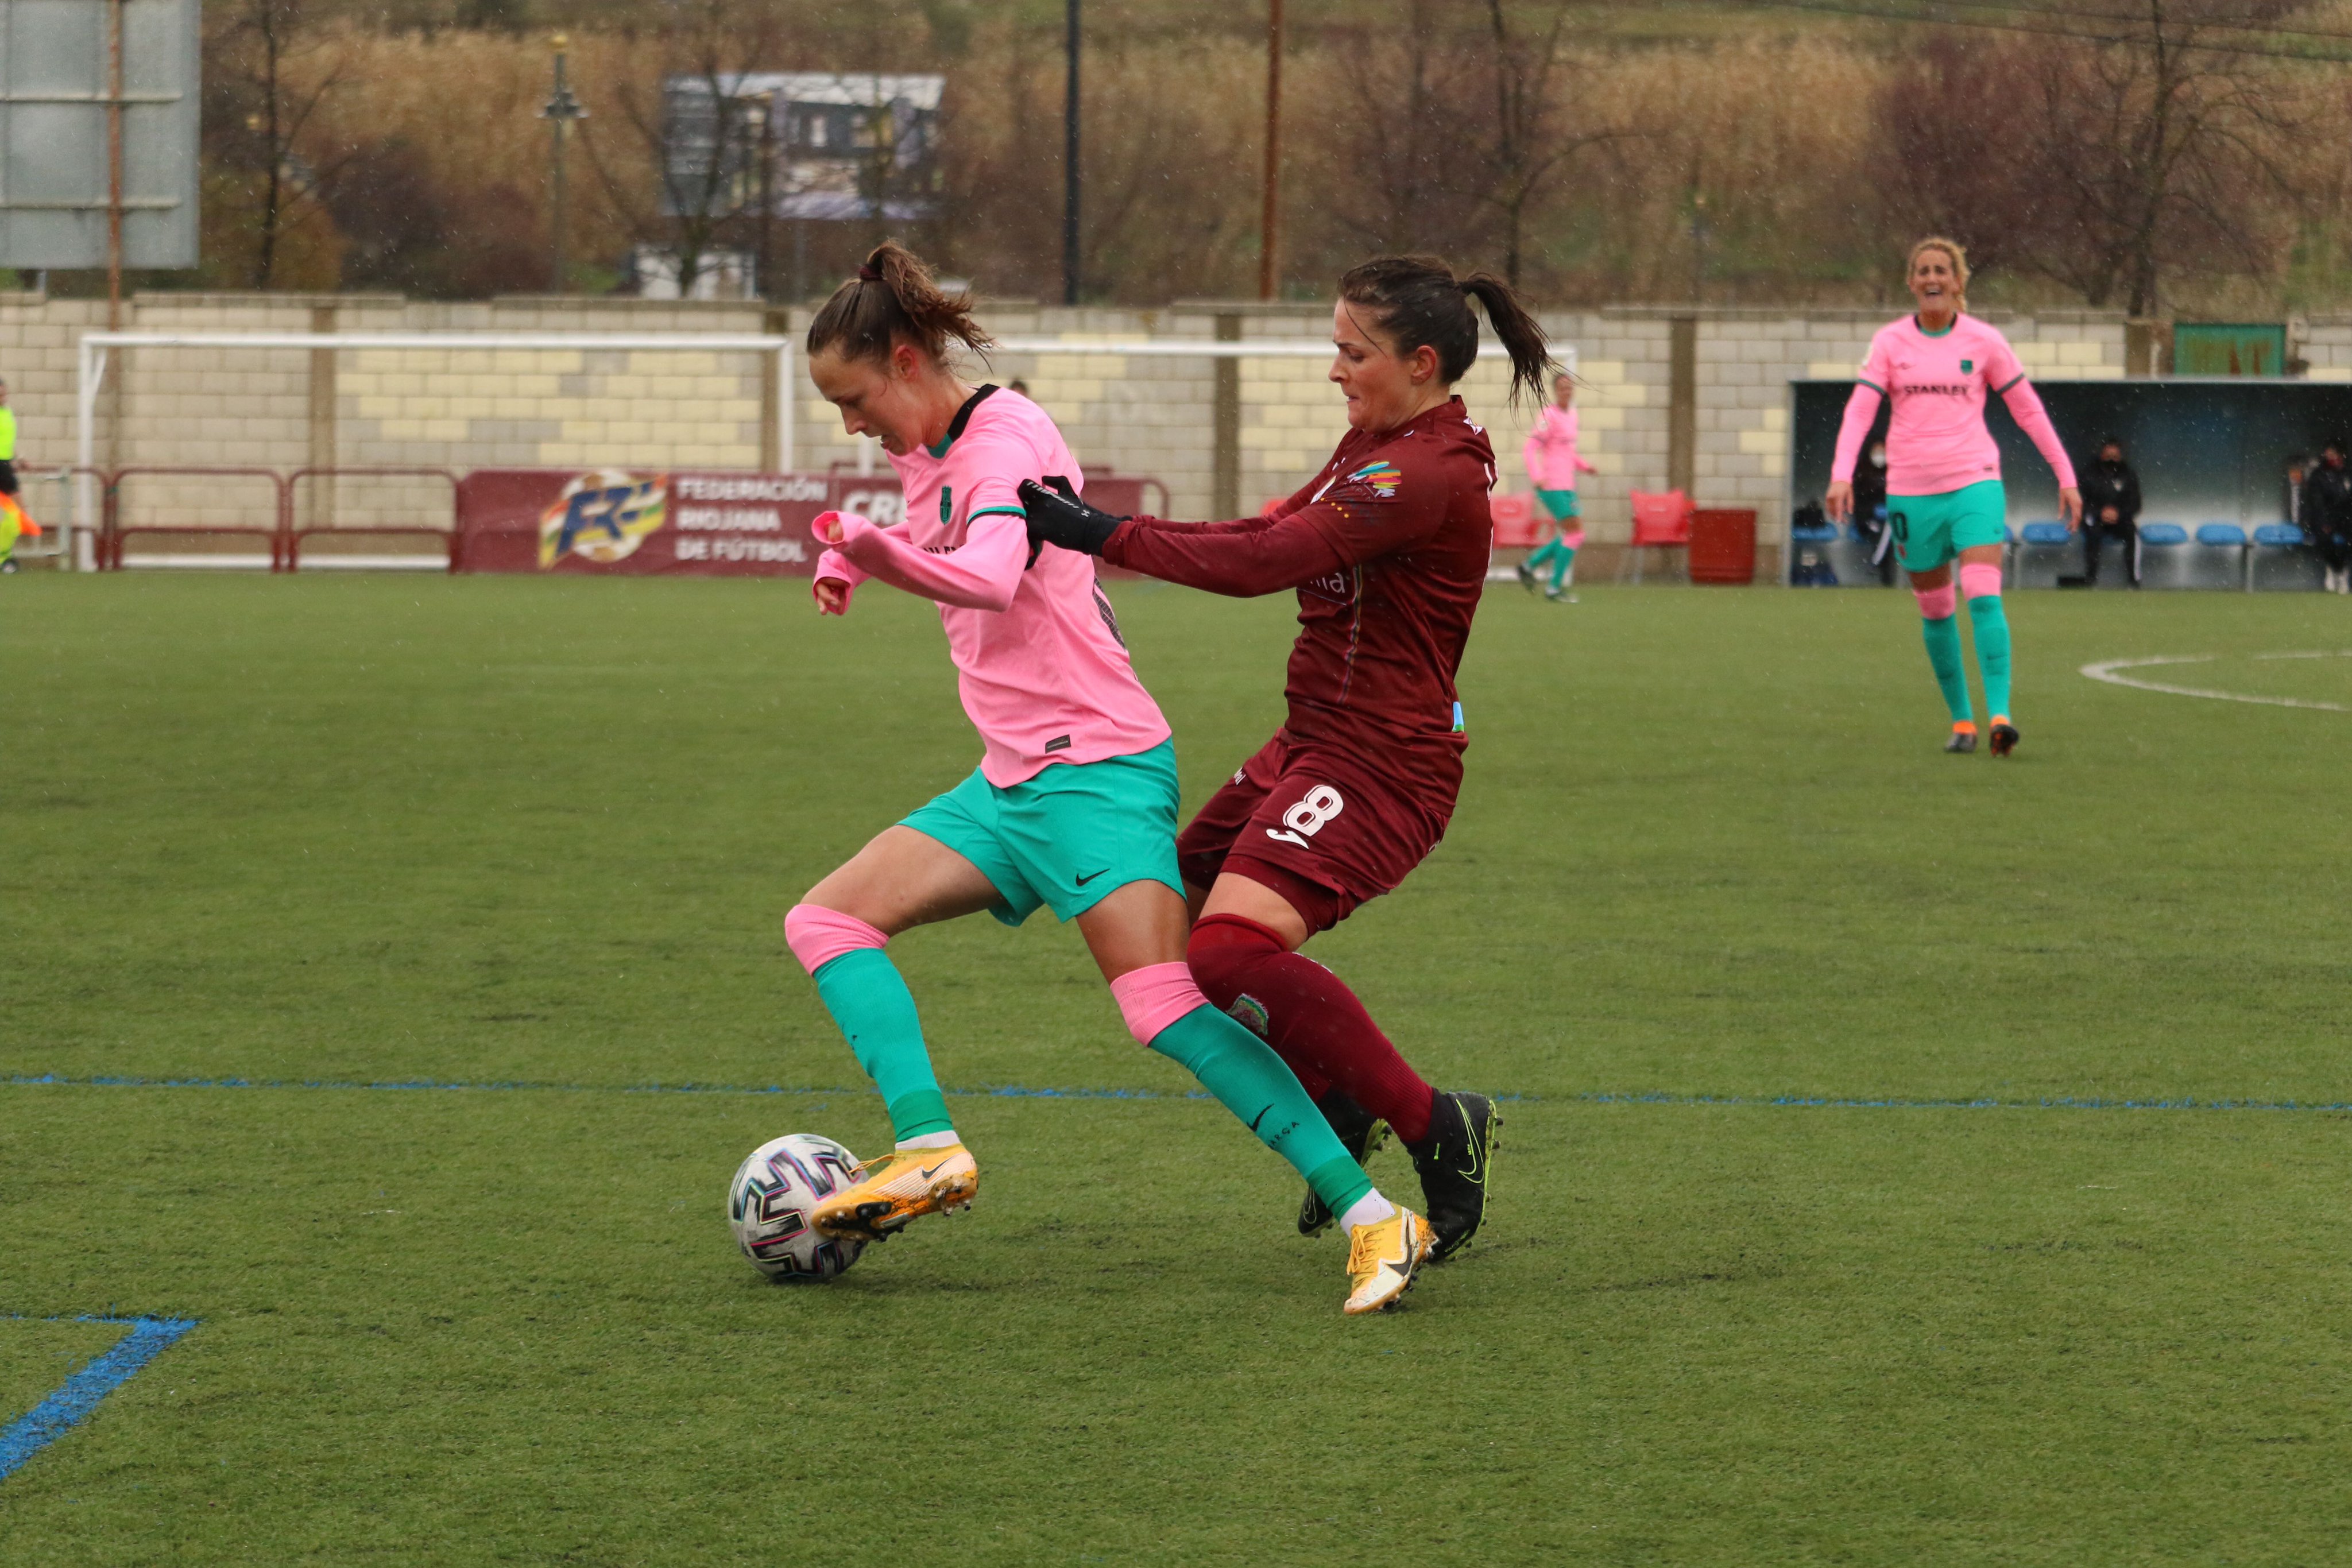 FC Barcelona Femení in action in their record-breaking win away to Logroña (image from FC Barcelona)